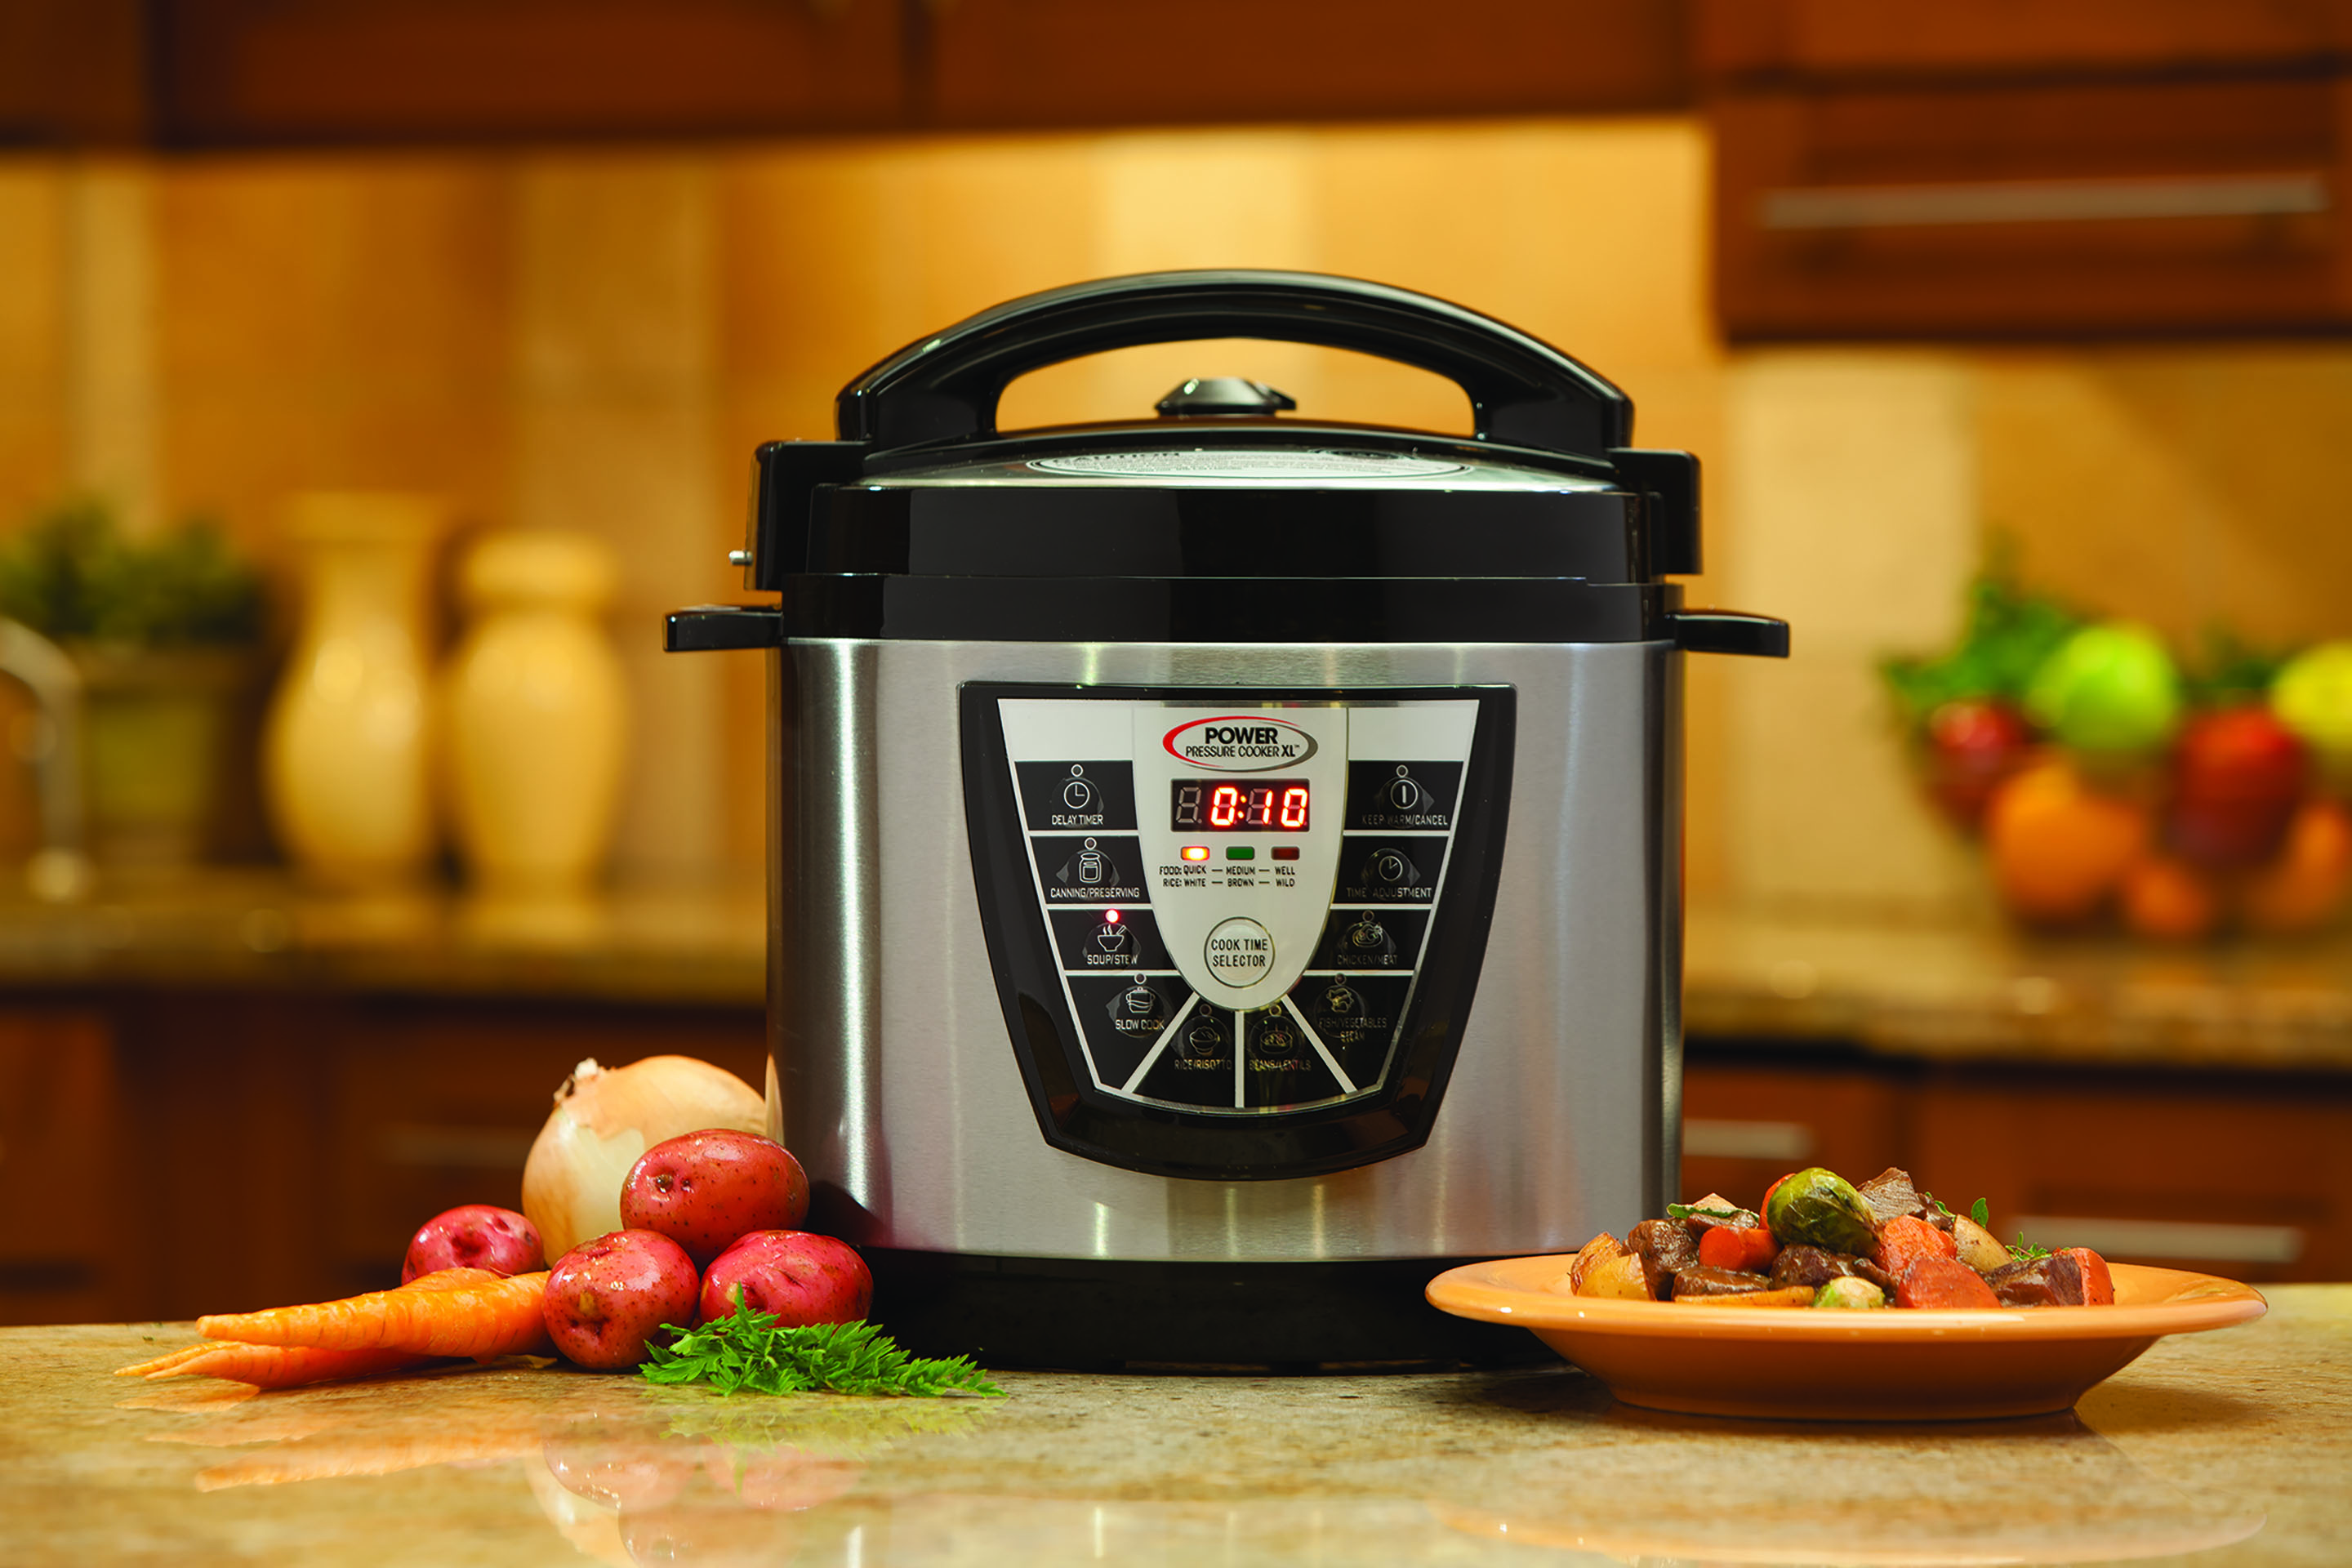 Power Pressure Cooker XL 6-Qt. Quart One Touch Cooking As Seen On TV PPC770  used